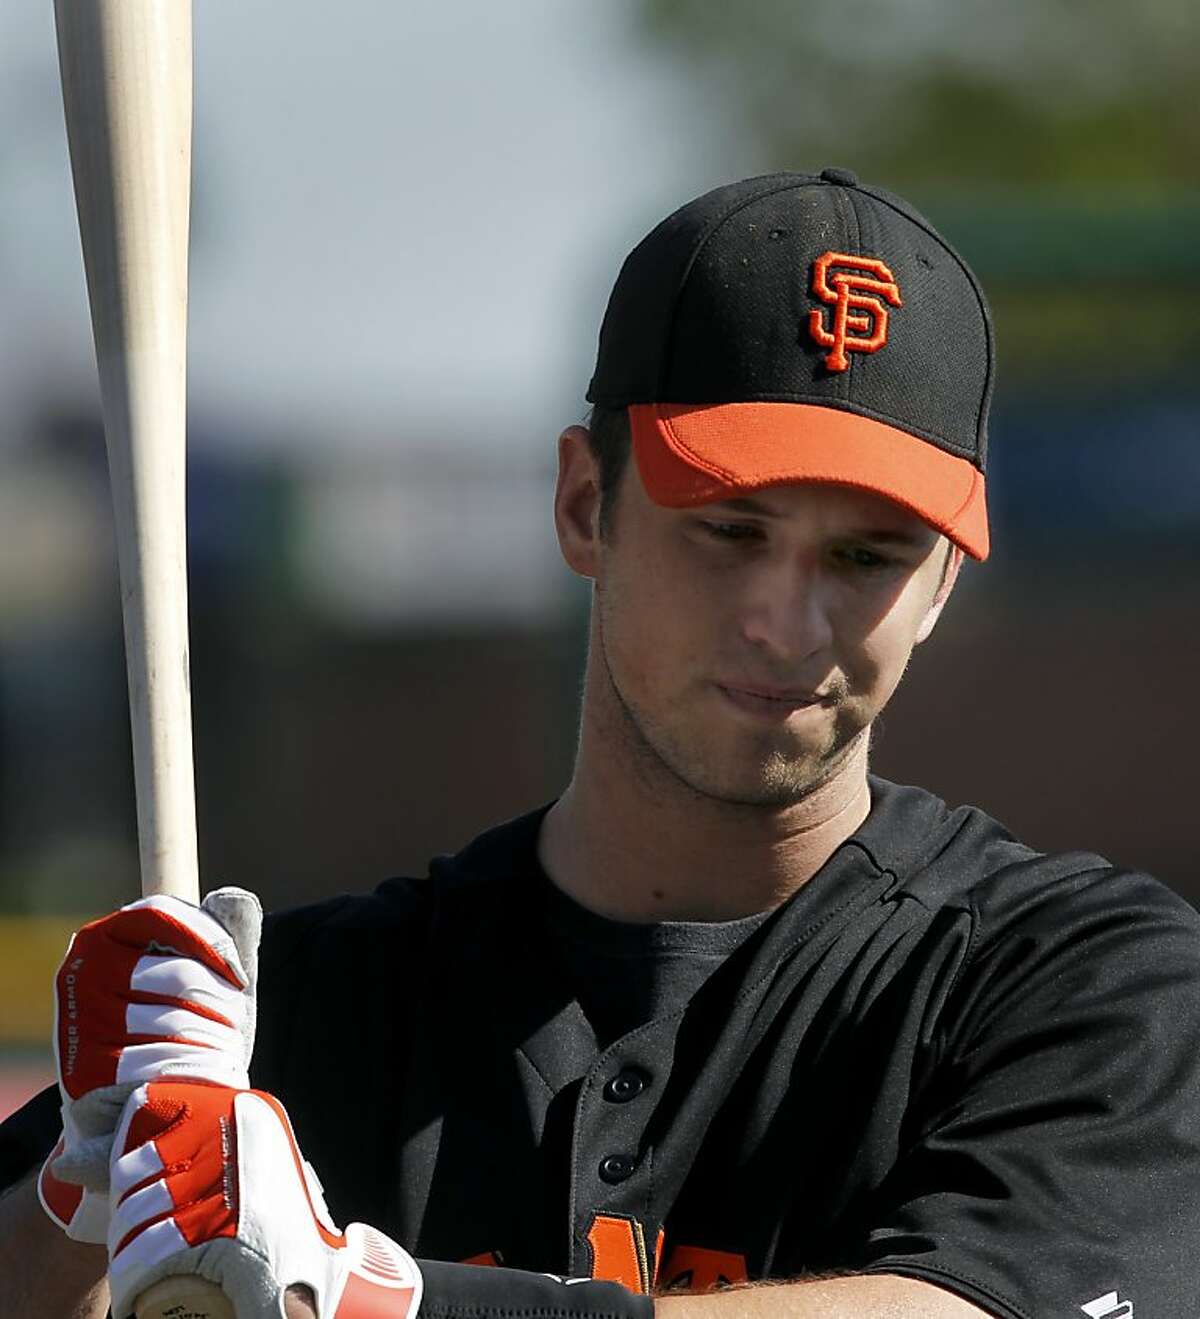 Buster Posey waits to take batting practice during the Giants workout at Scottsdale Stadium in Scottsdale, Ariz. on Thursday, March 8, 2012. Posey is scheduled to play in his first Cactus League game Friday.